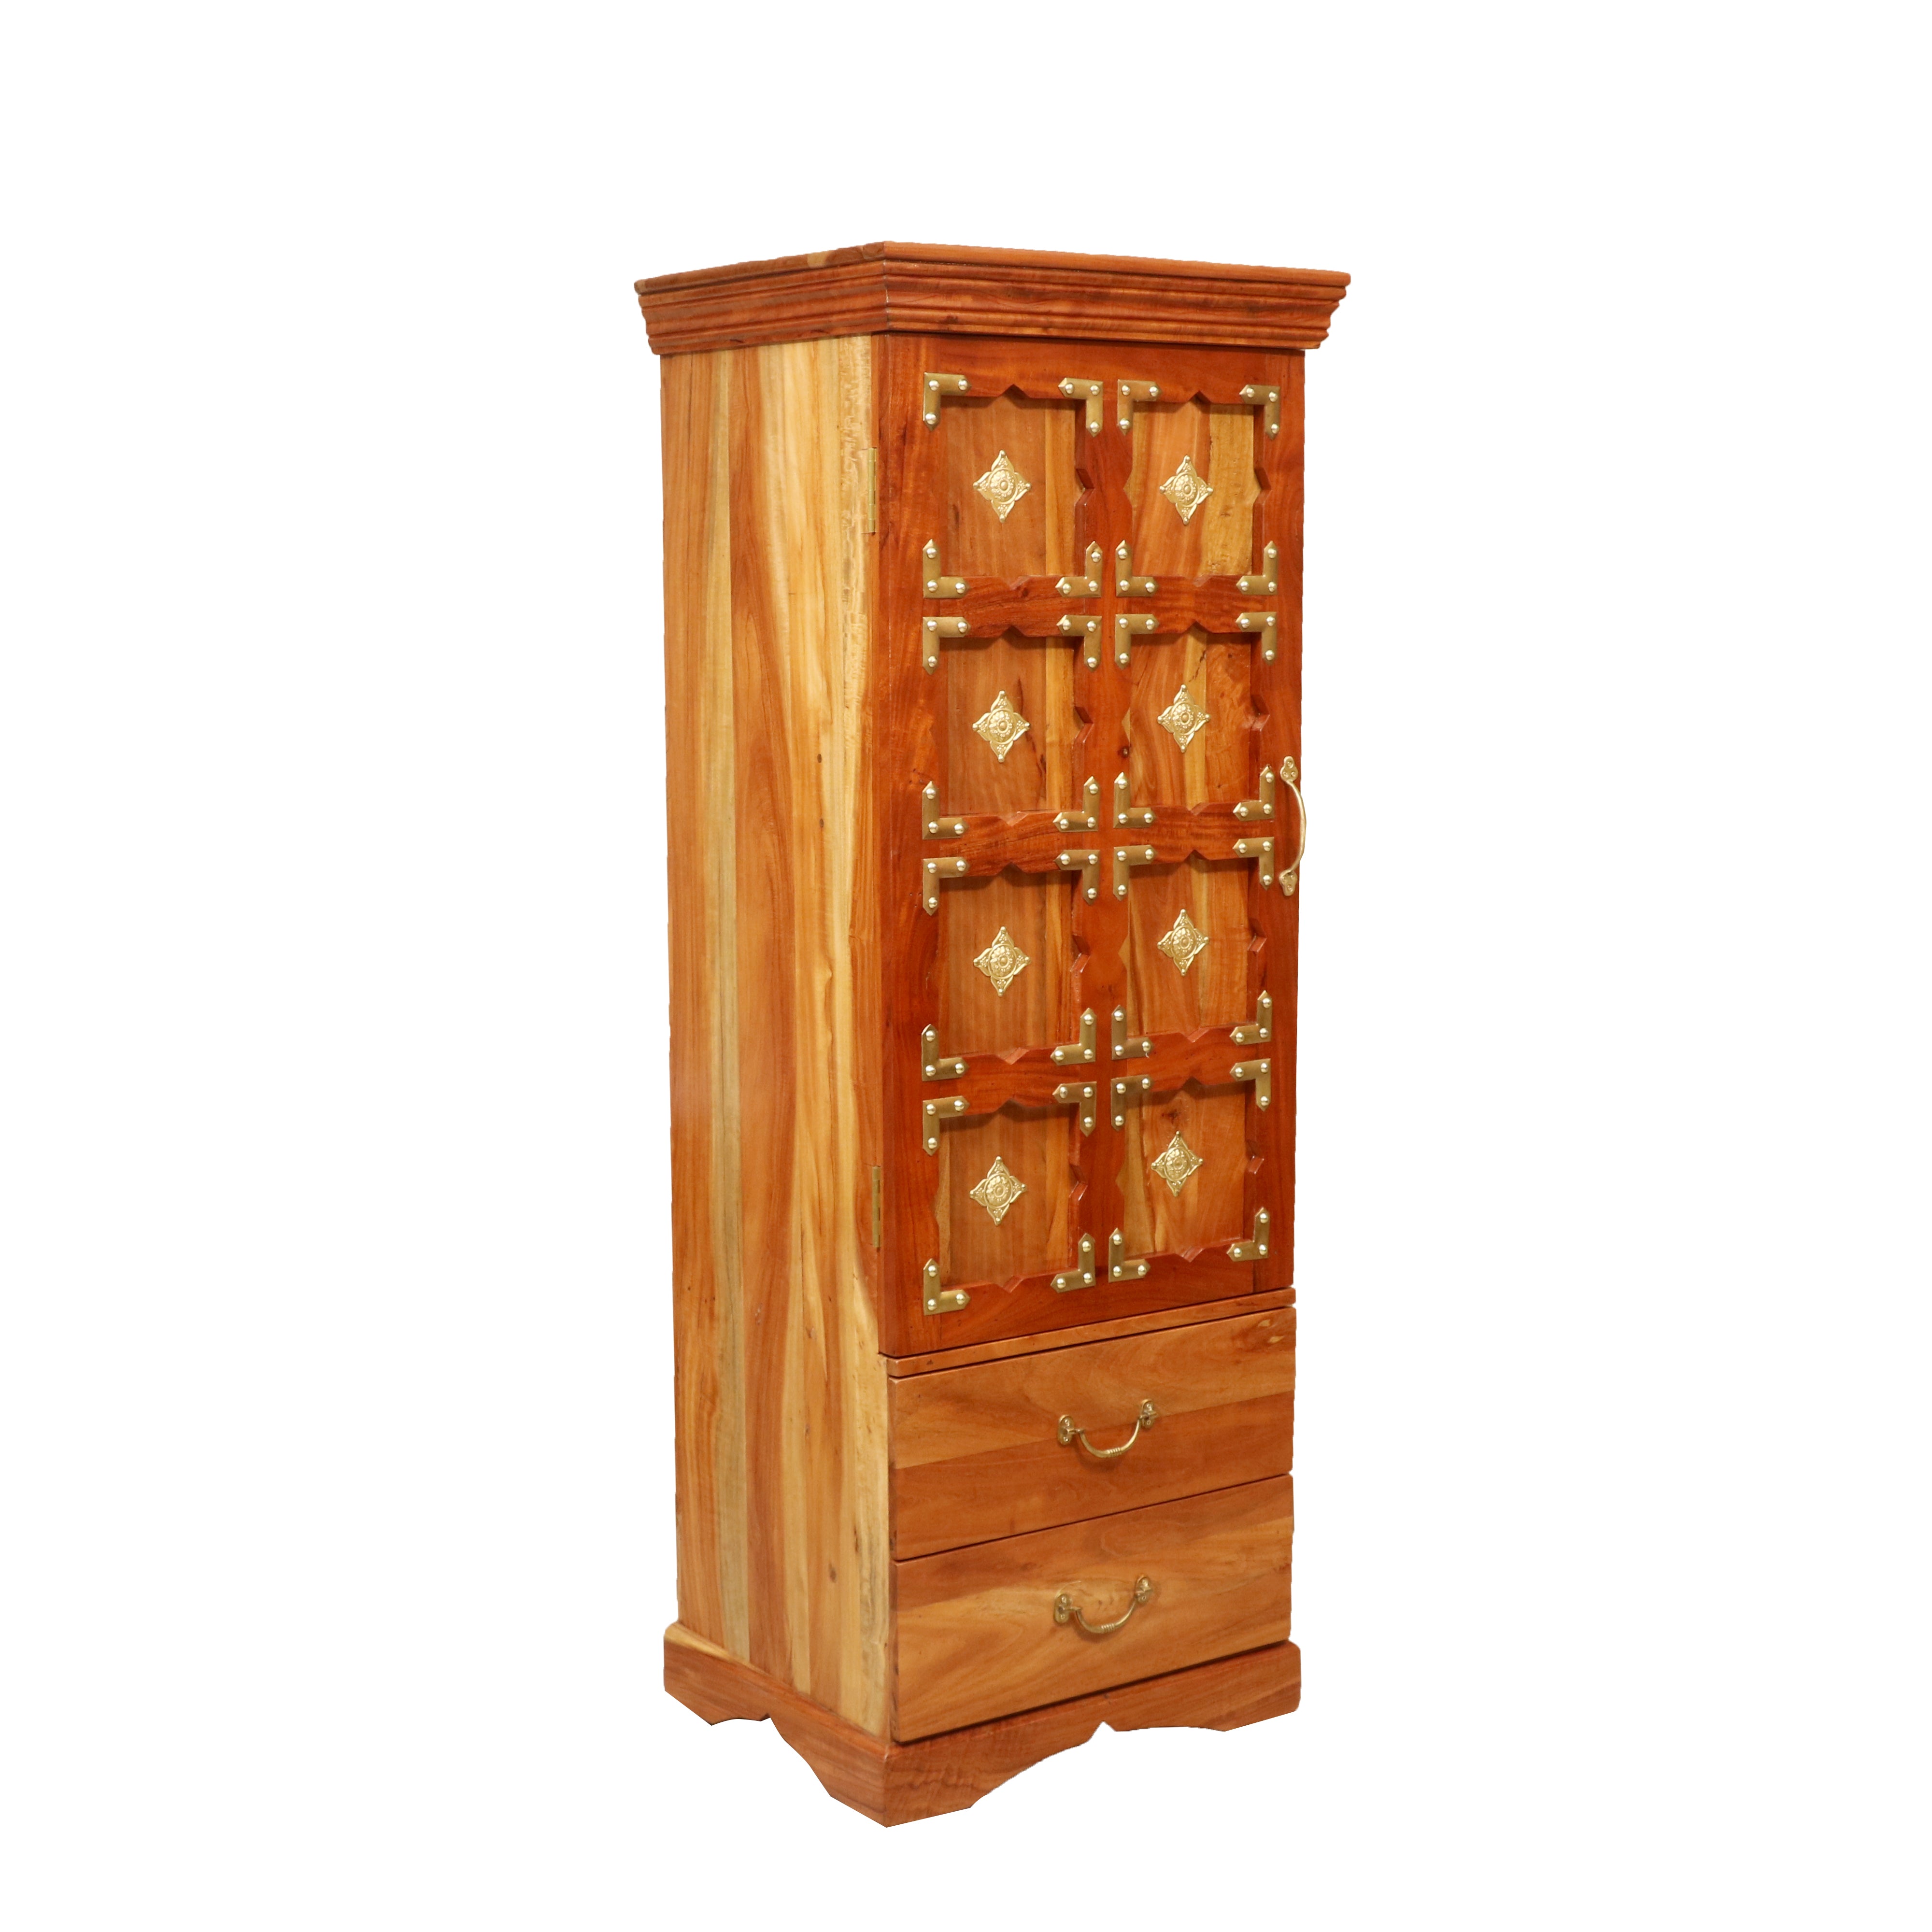 Natural Tone Solid Wood Rustic Cabinet Showcase